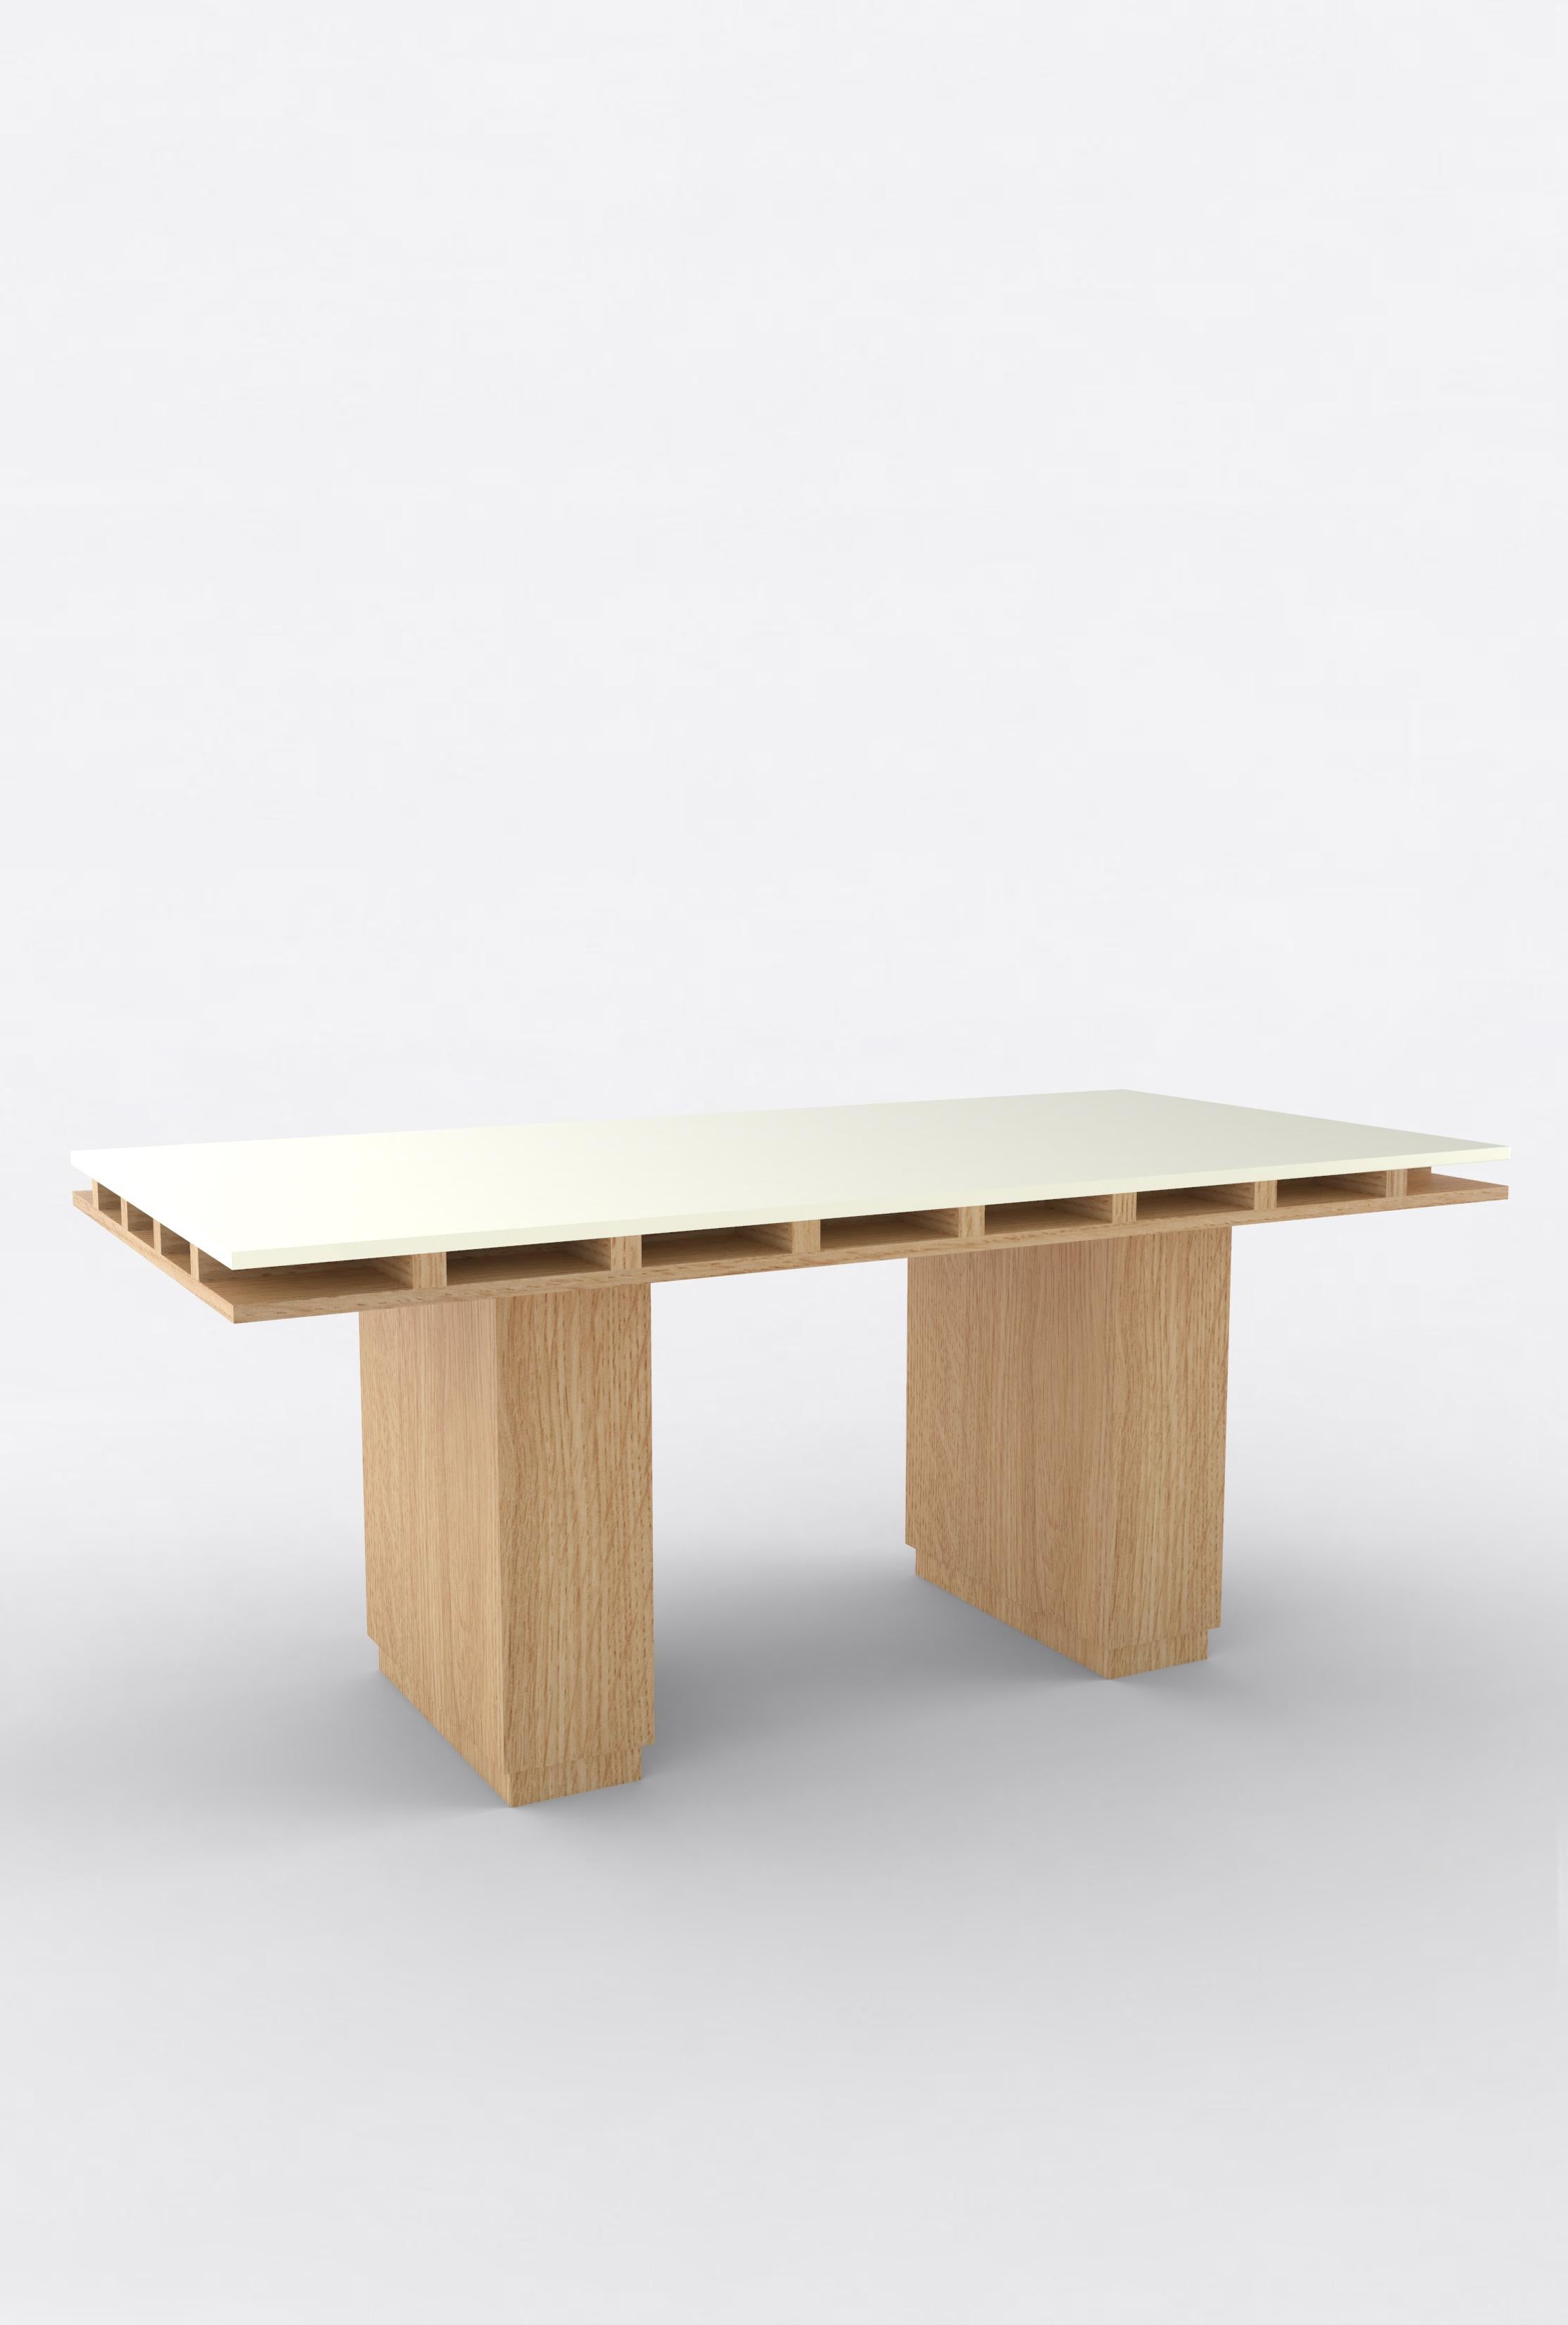 Orphan Work 103 Dining Table
Shown in oak and white or off-white
Available in natural oak with painted top
Measures: 108”L x 36”W x 30”H
Dimensions available:
72”L x 36”W x 30”H
84”L x 36”W x 30”H
96”L x 36”W x 30”H
108”L x 42”W x 30”H
120”L x 42”W